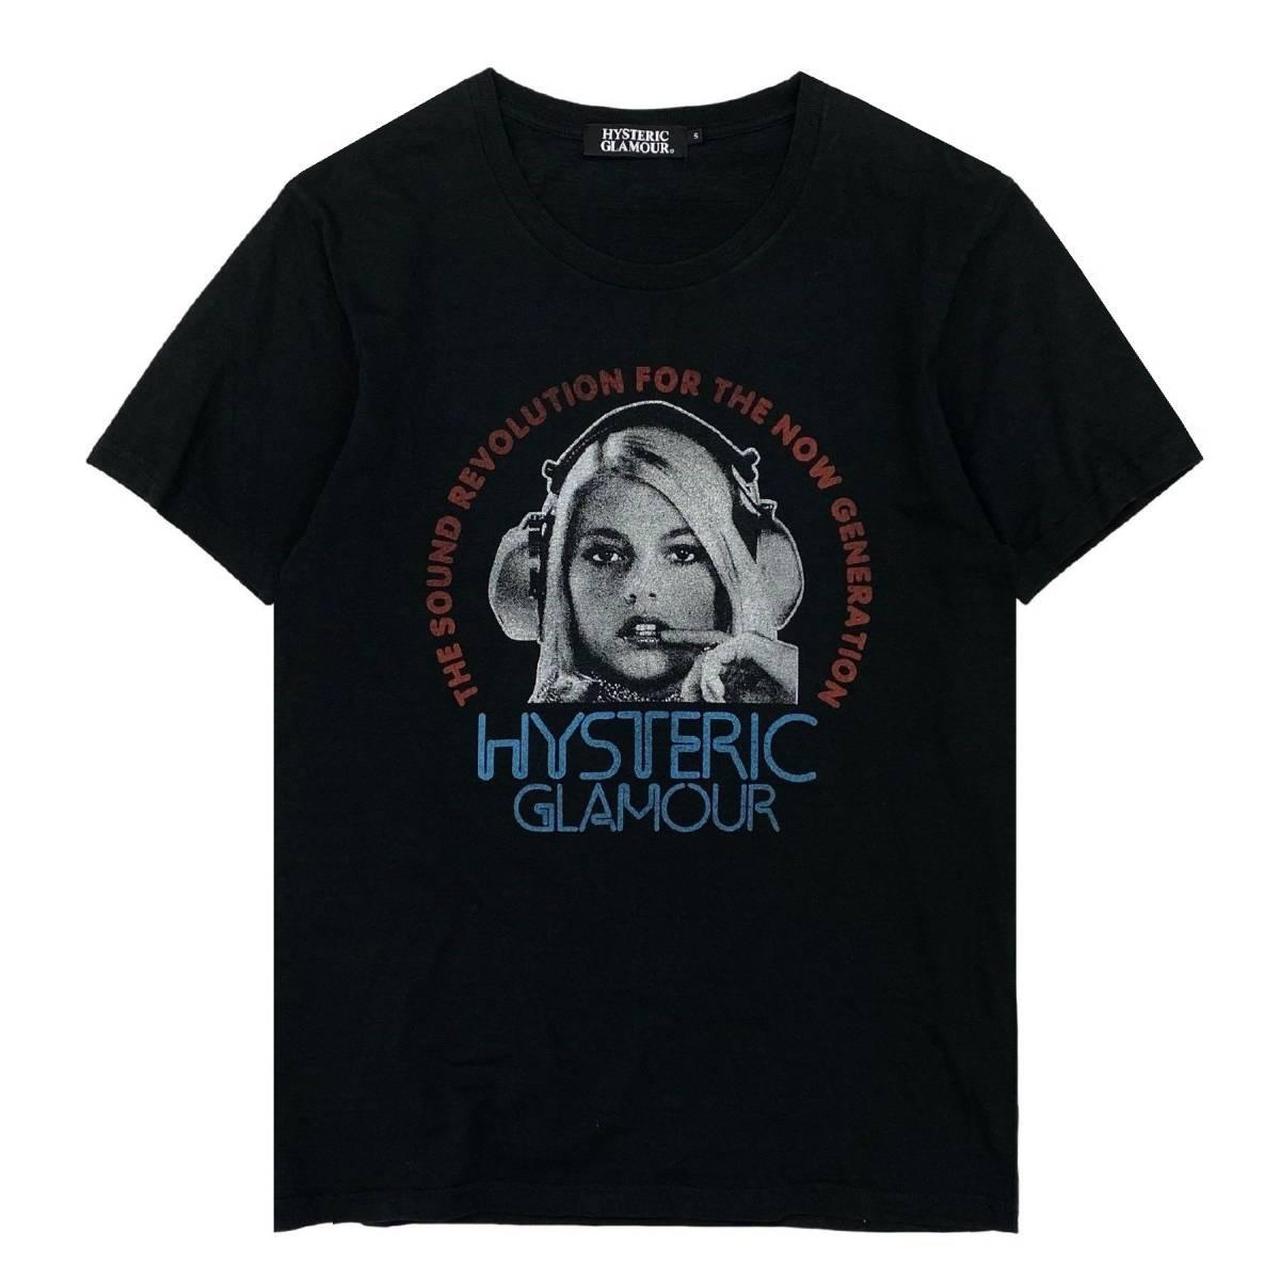 Hysteric Glamour “The Sound Revolution for The Now... - Depop